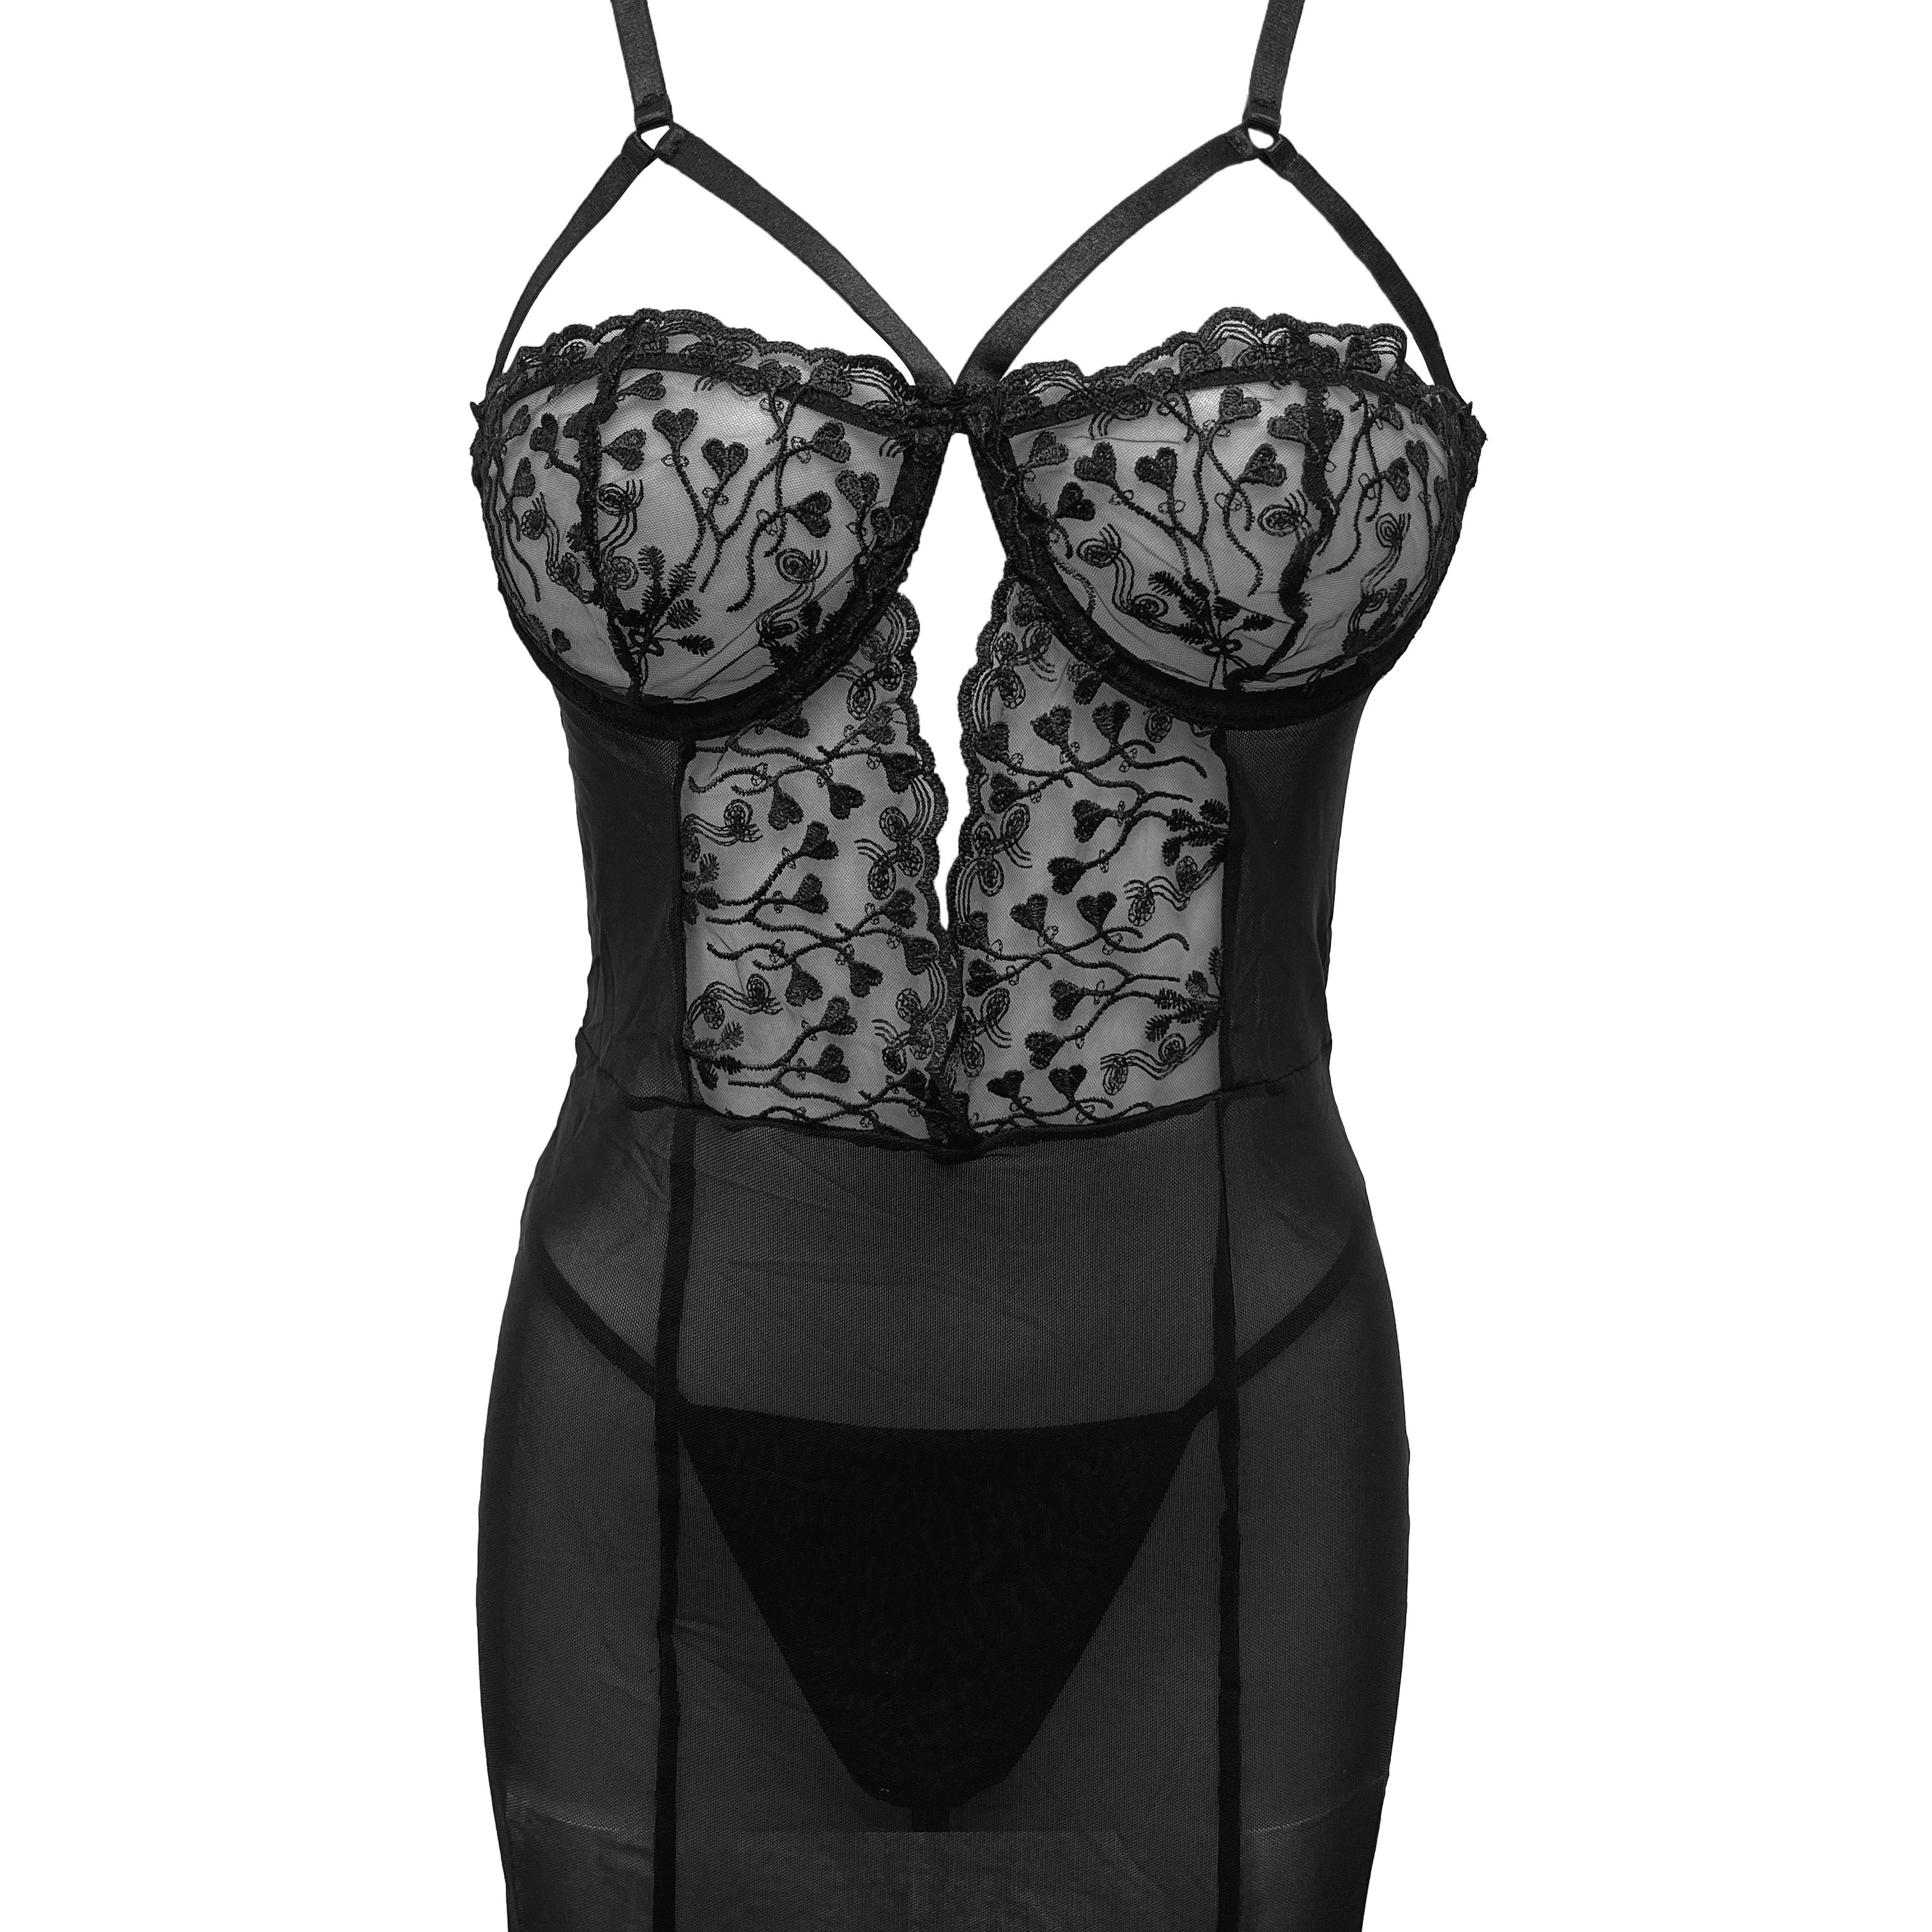 Unleash/ed Elisa Sheer Dress and Thong Lingerie Set - See-Through Lingerie - Sexy Lingerie